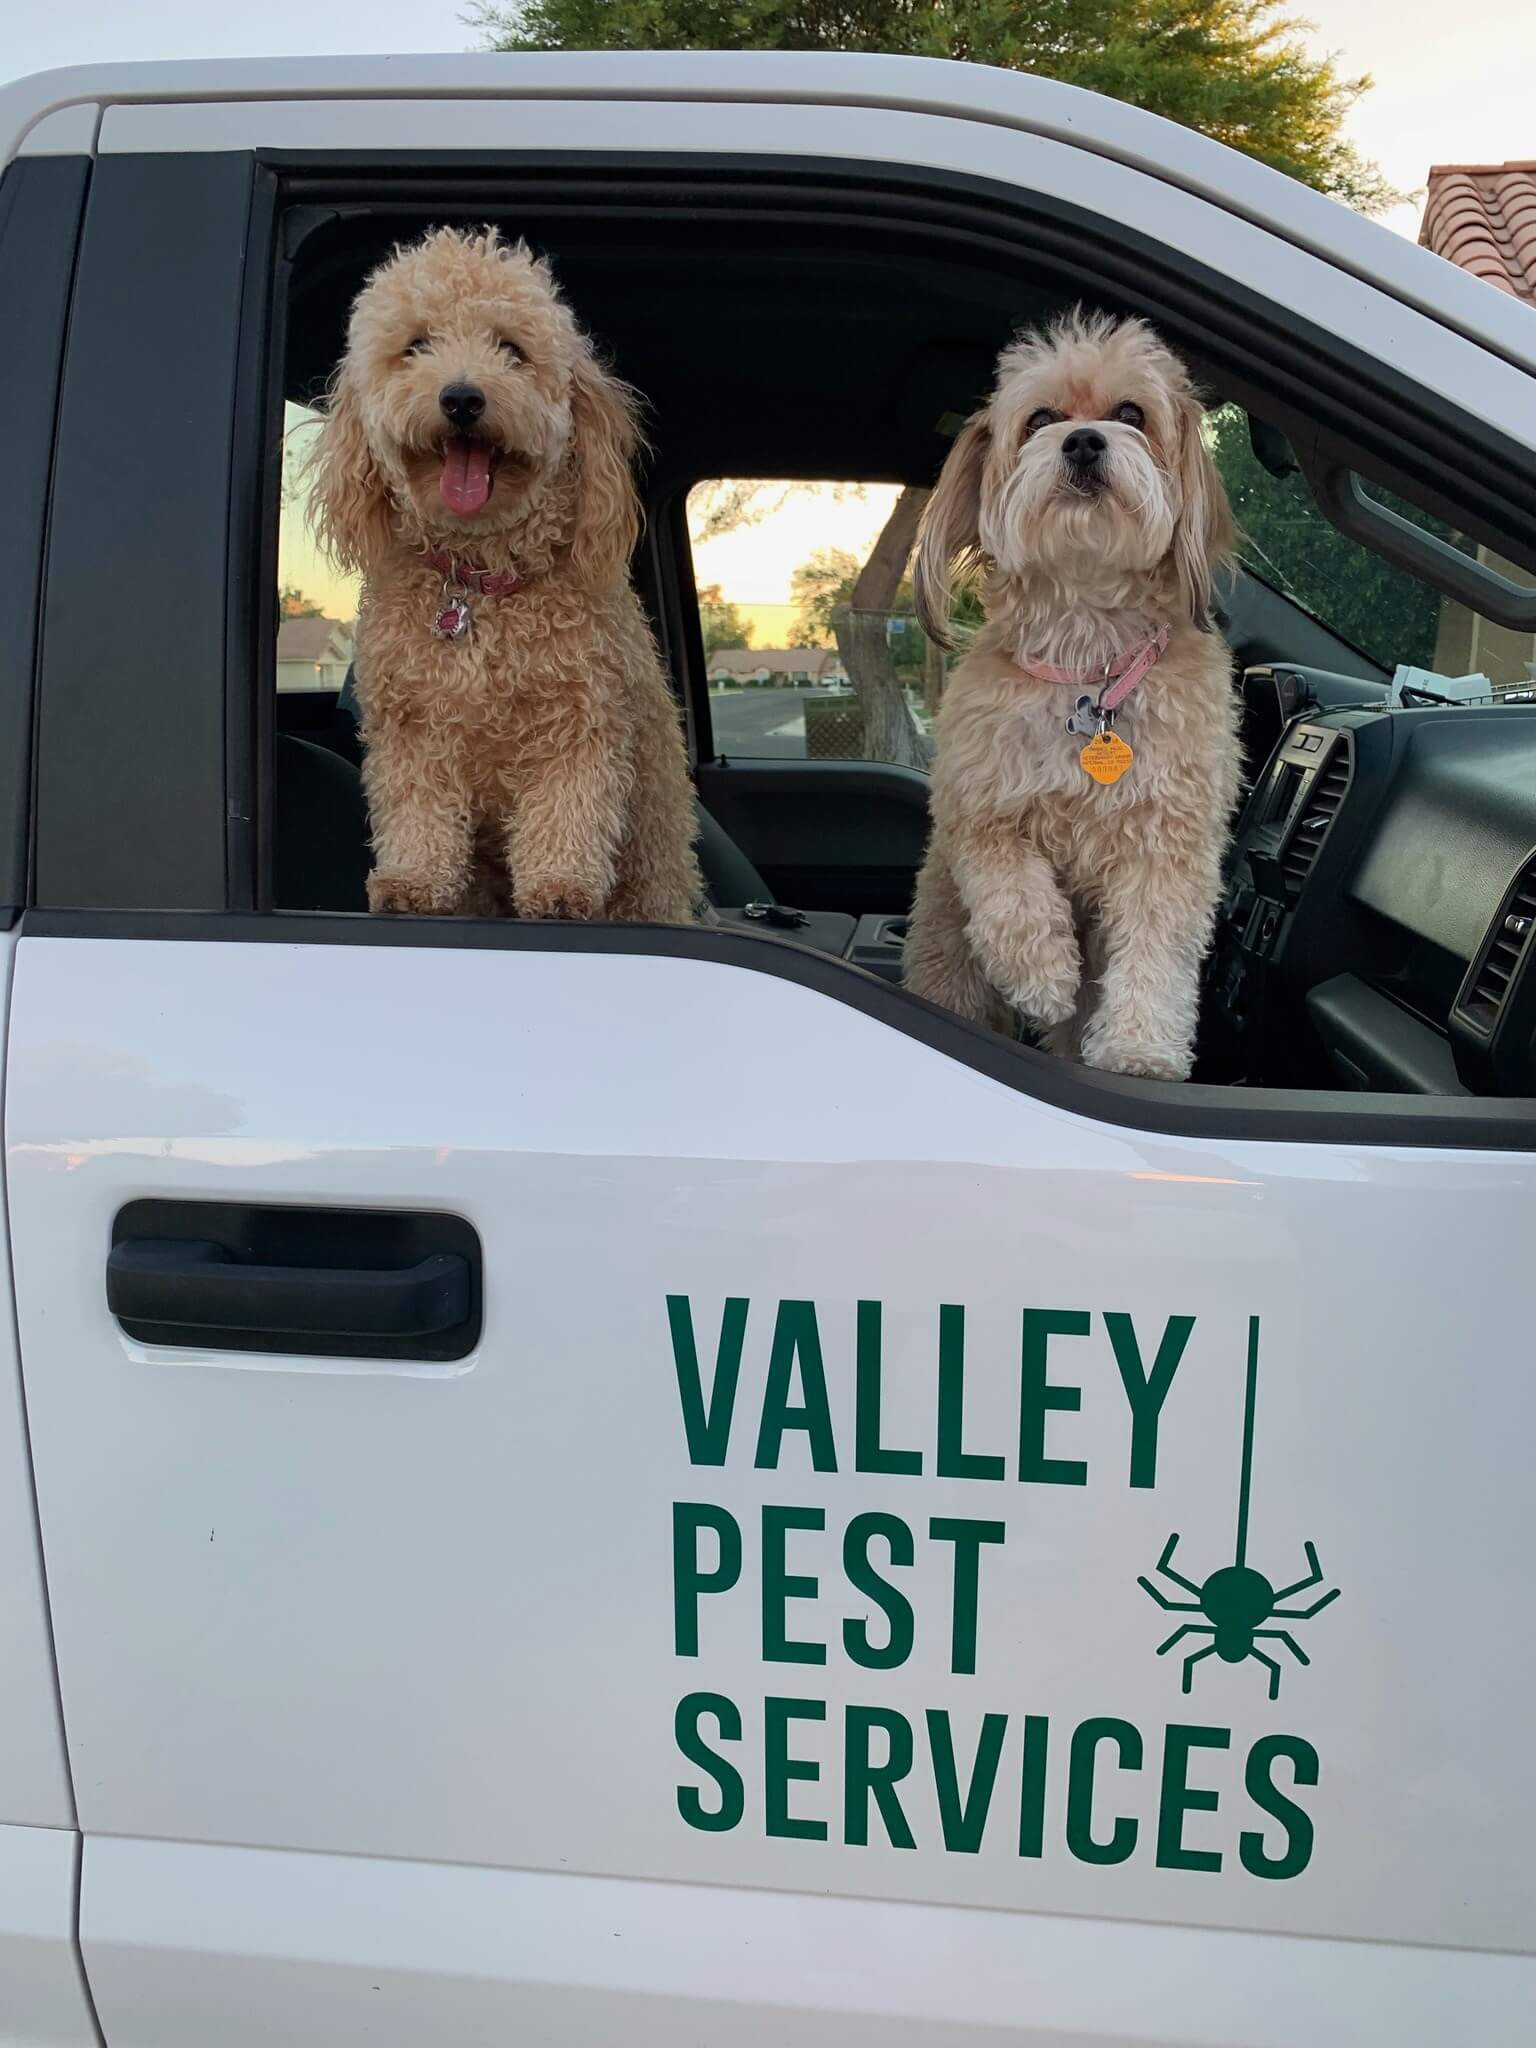 Valley Pest Services mascots